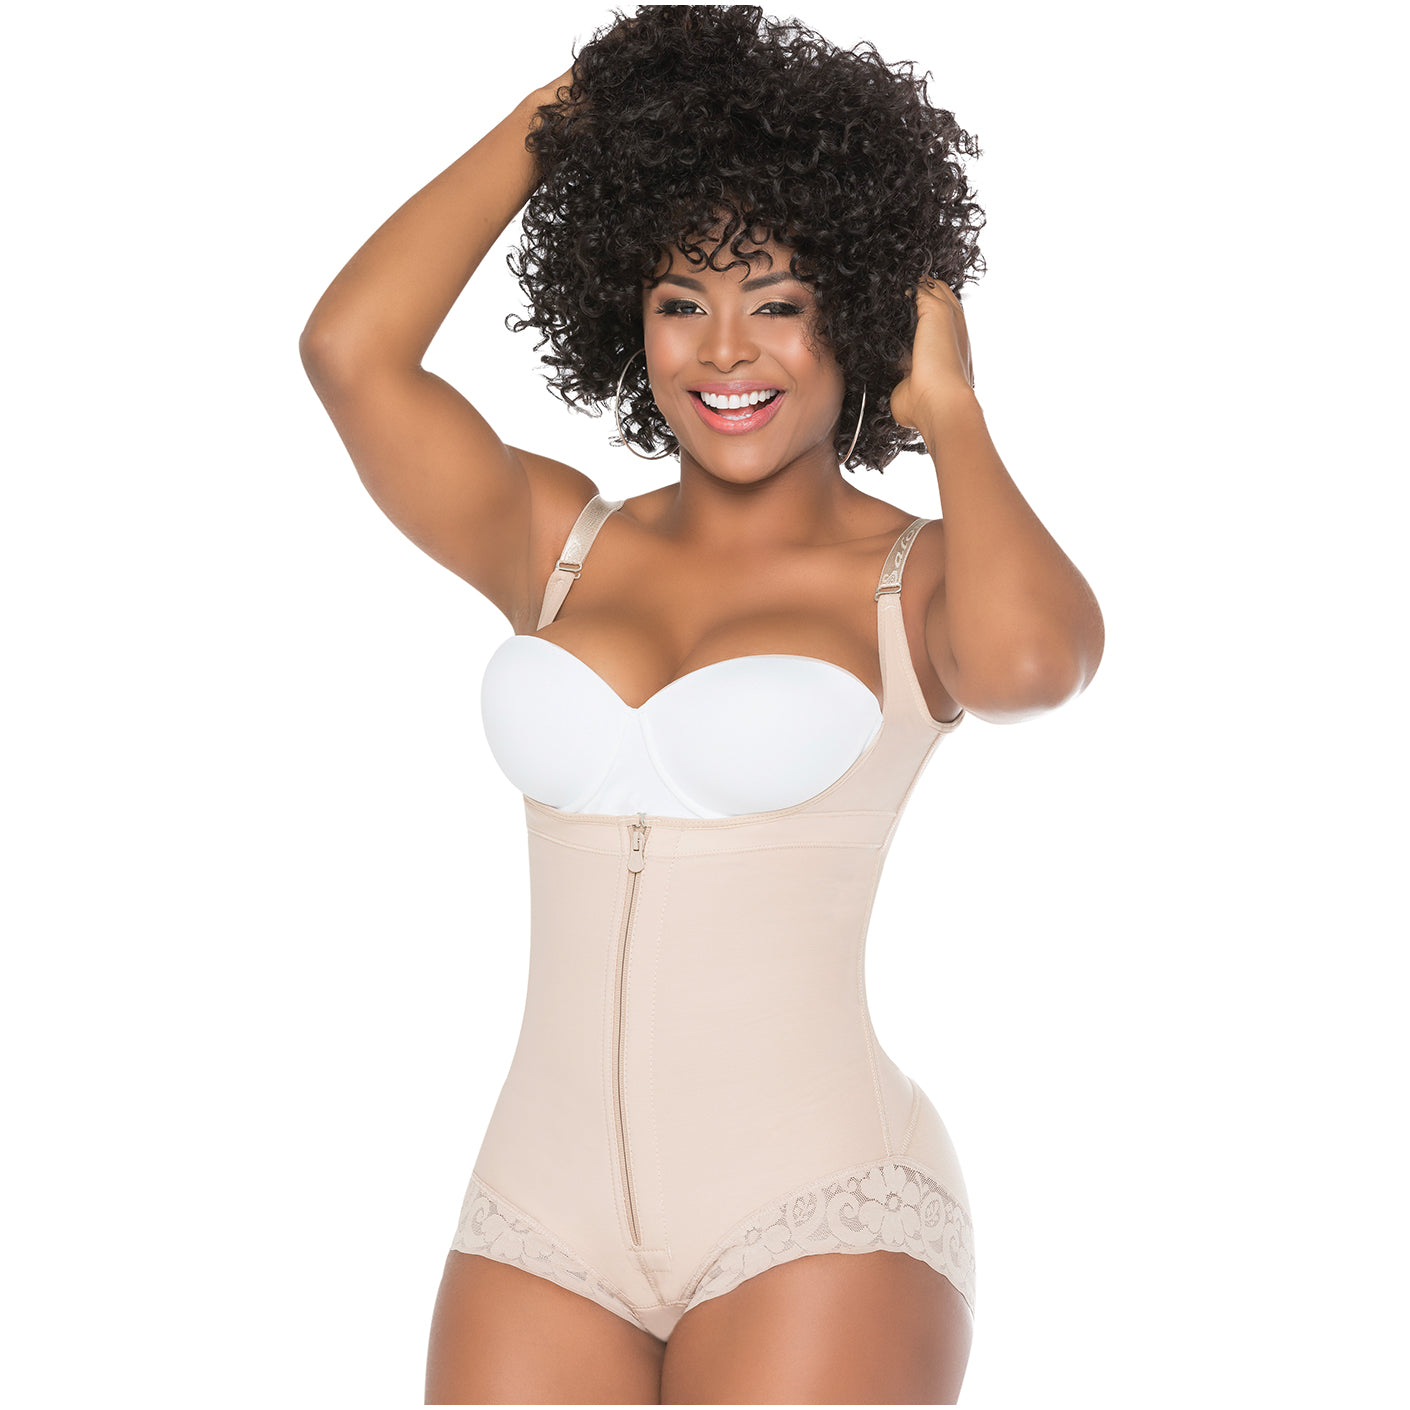 Salome Butt Lift Girdle 0520  Colombian Shapewear and More